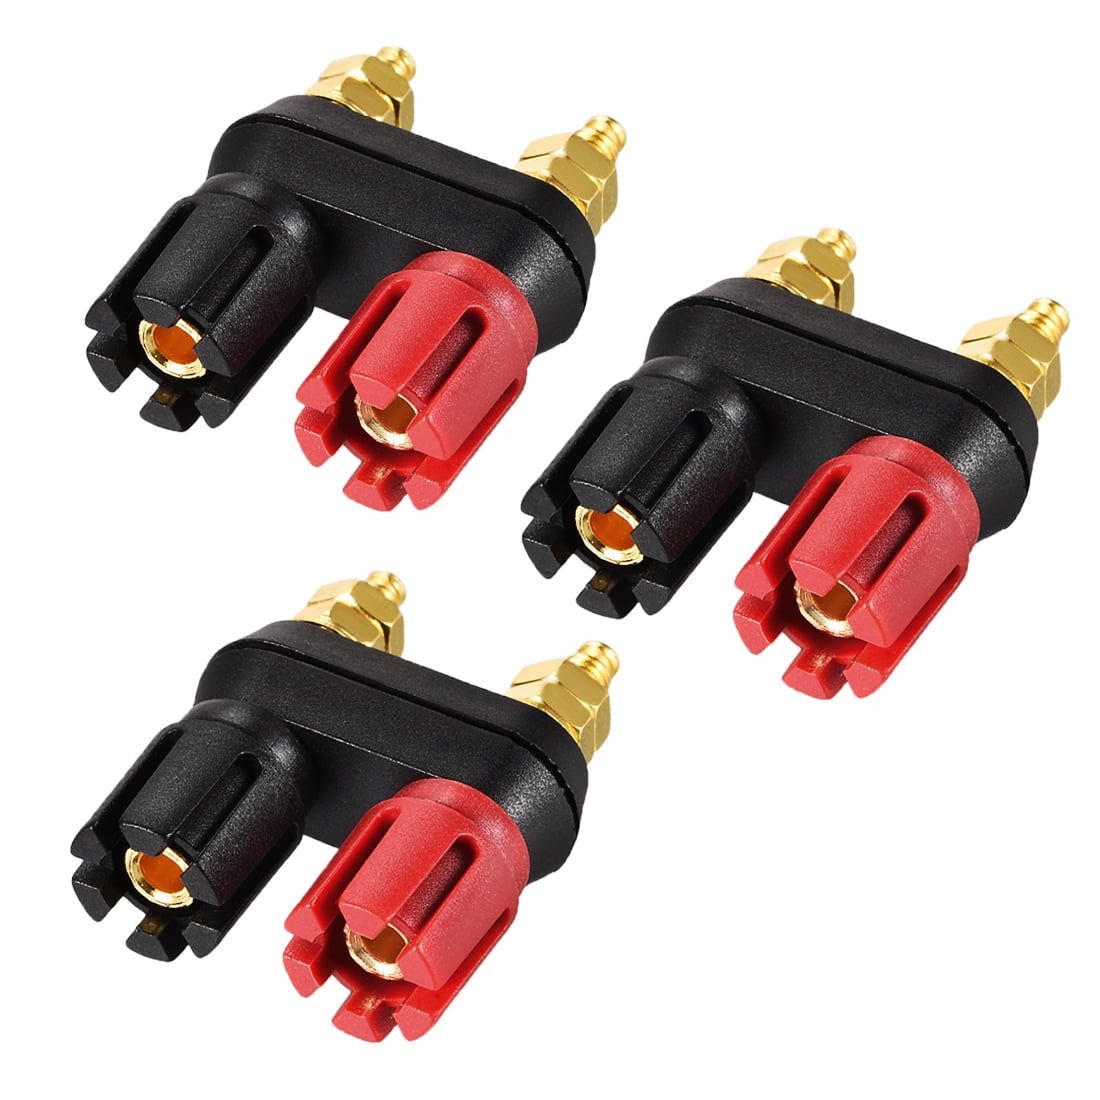 10 PCS Gold Plated binding post amplifier speaker audio connector terminal 